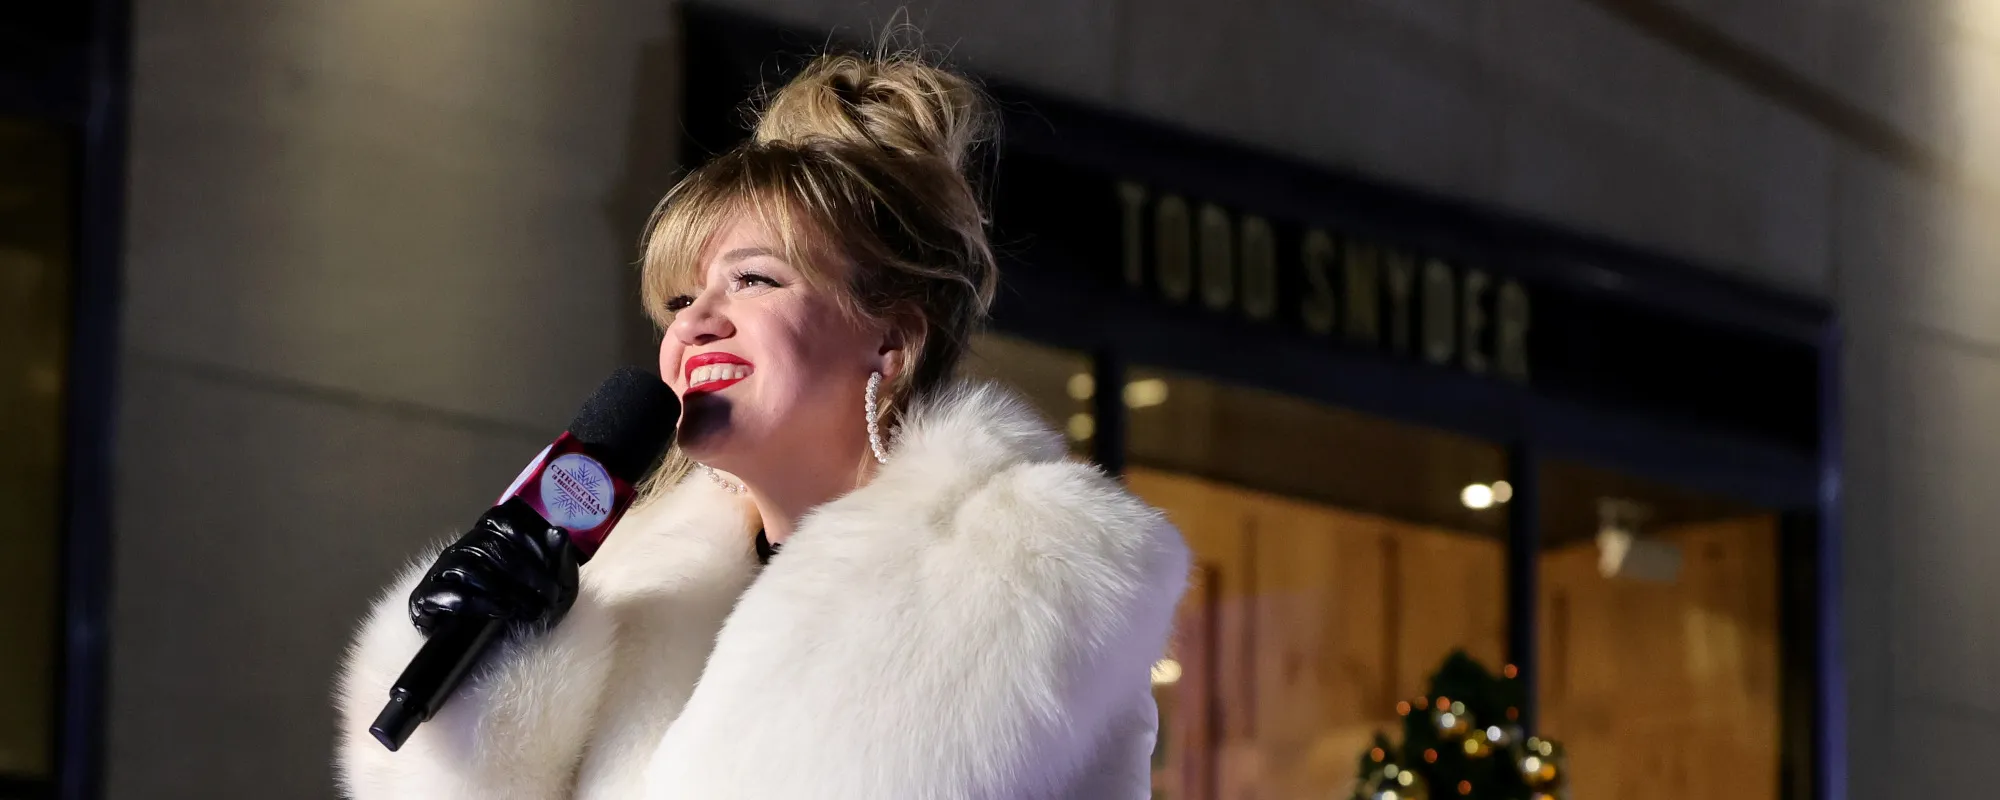 Where Are They Now? First-Ever ‘American Idol’ Winner Kelly Clarkson